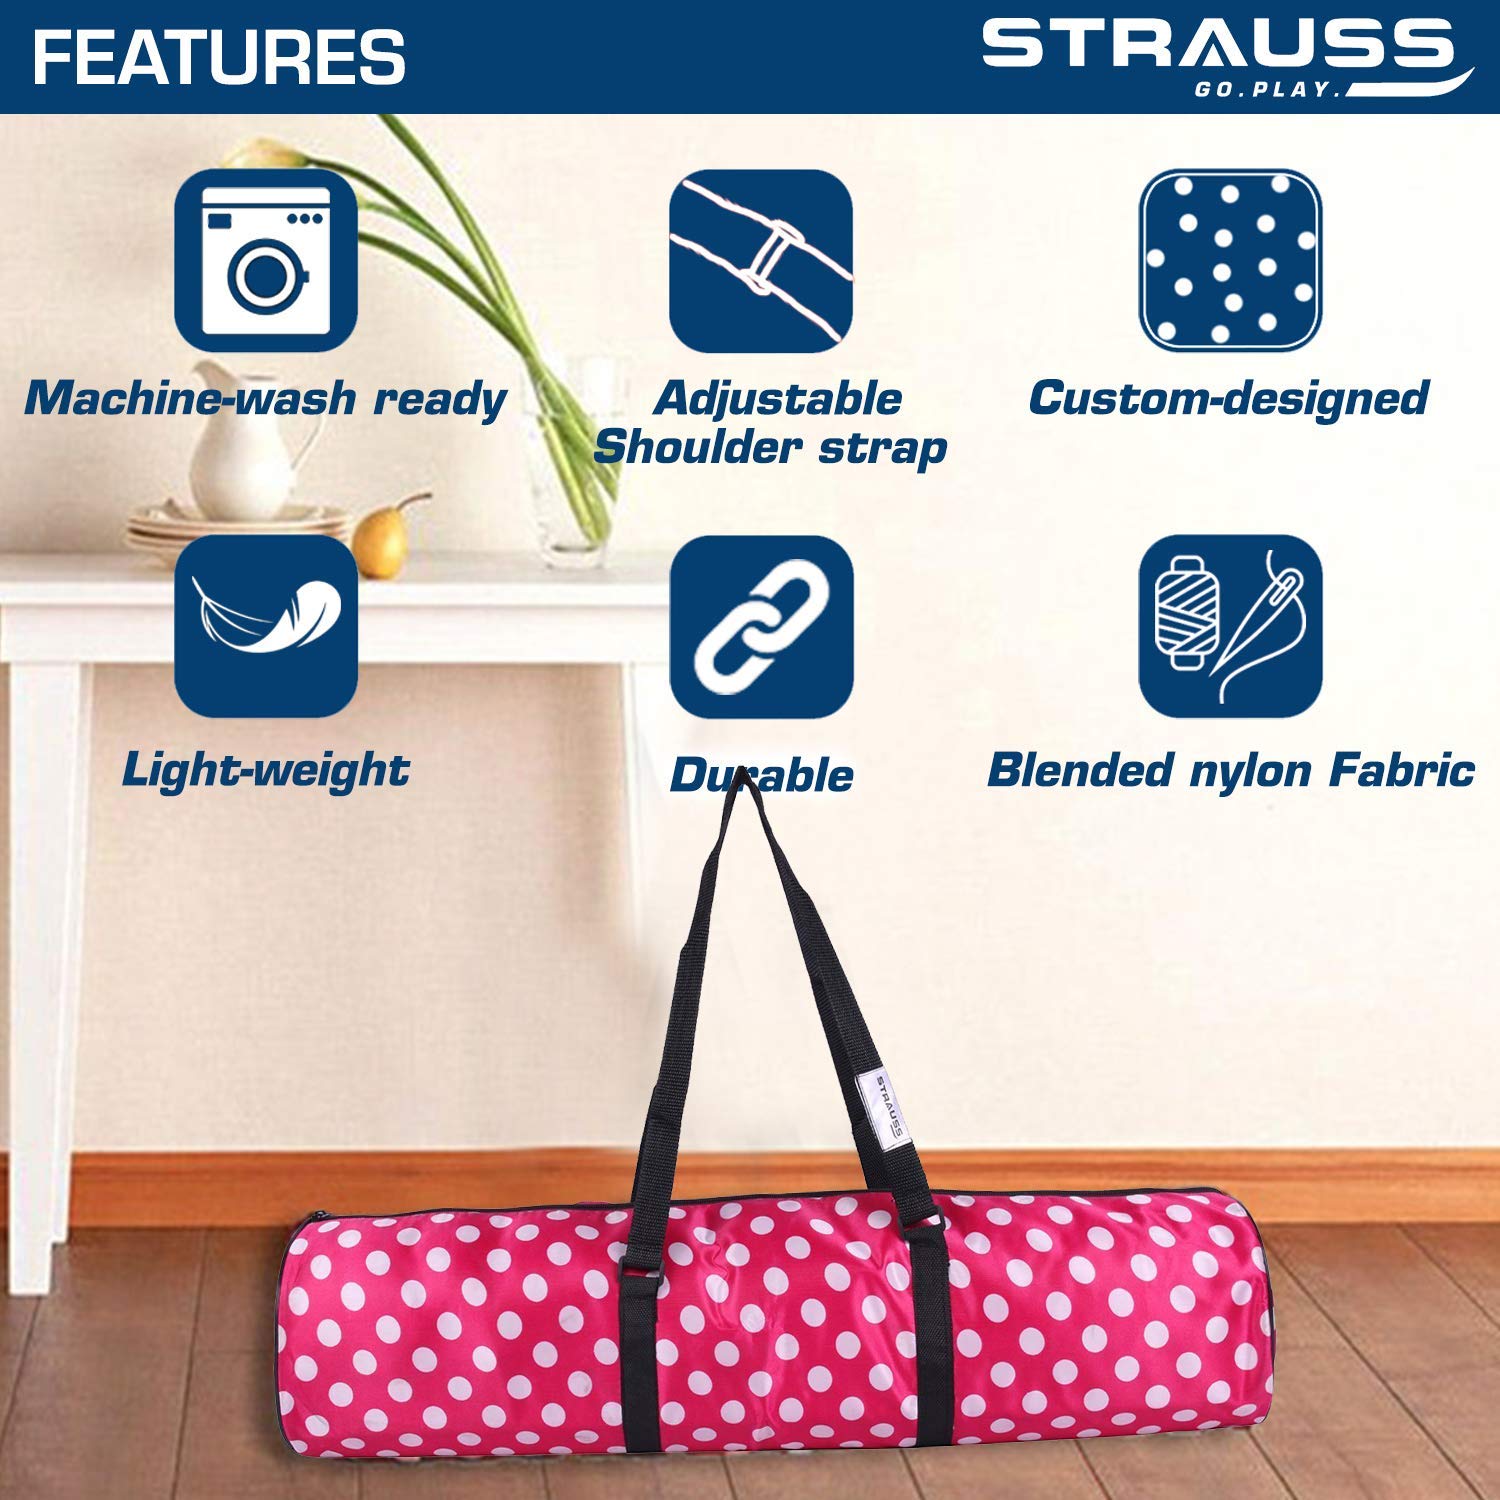 Strauss Yoga Mat 6MM,(Floral Blue) and Yoga Knee Pad Cushion